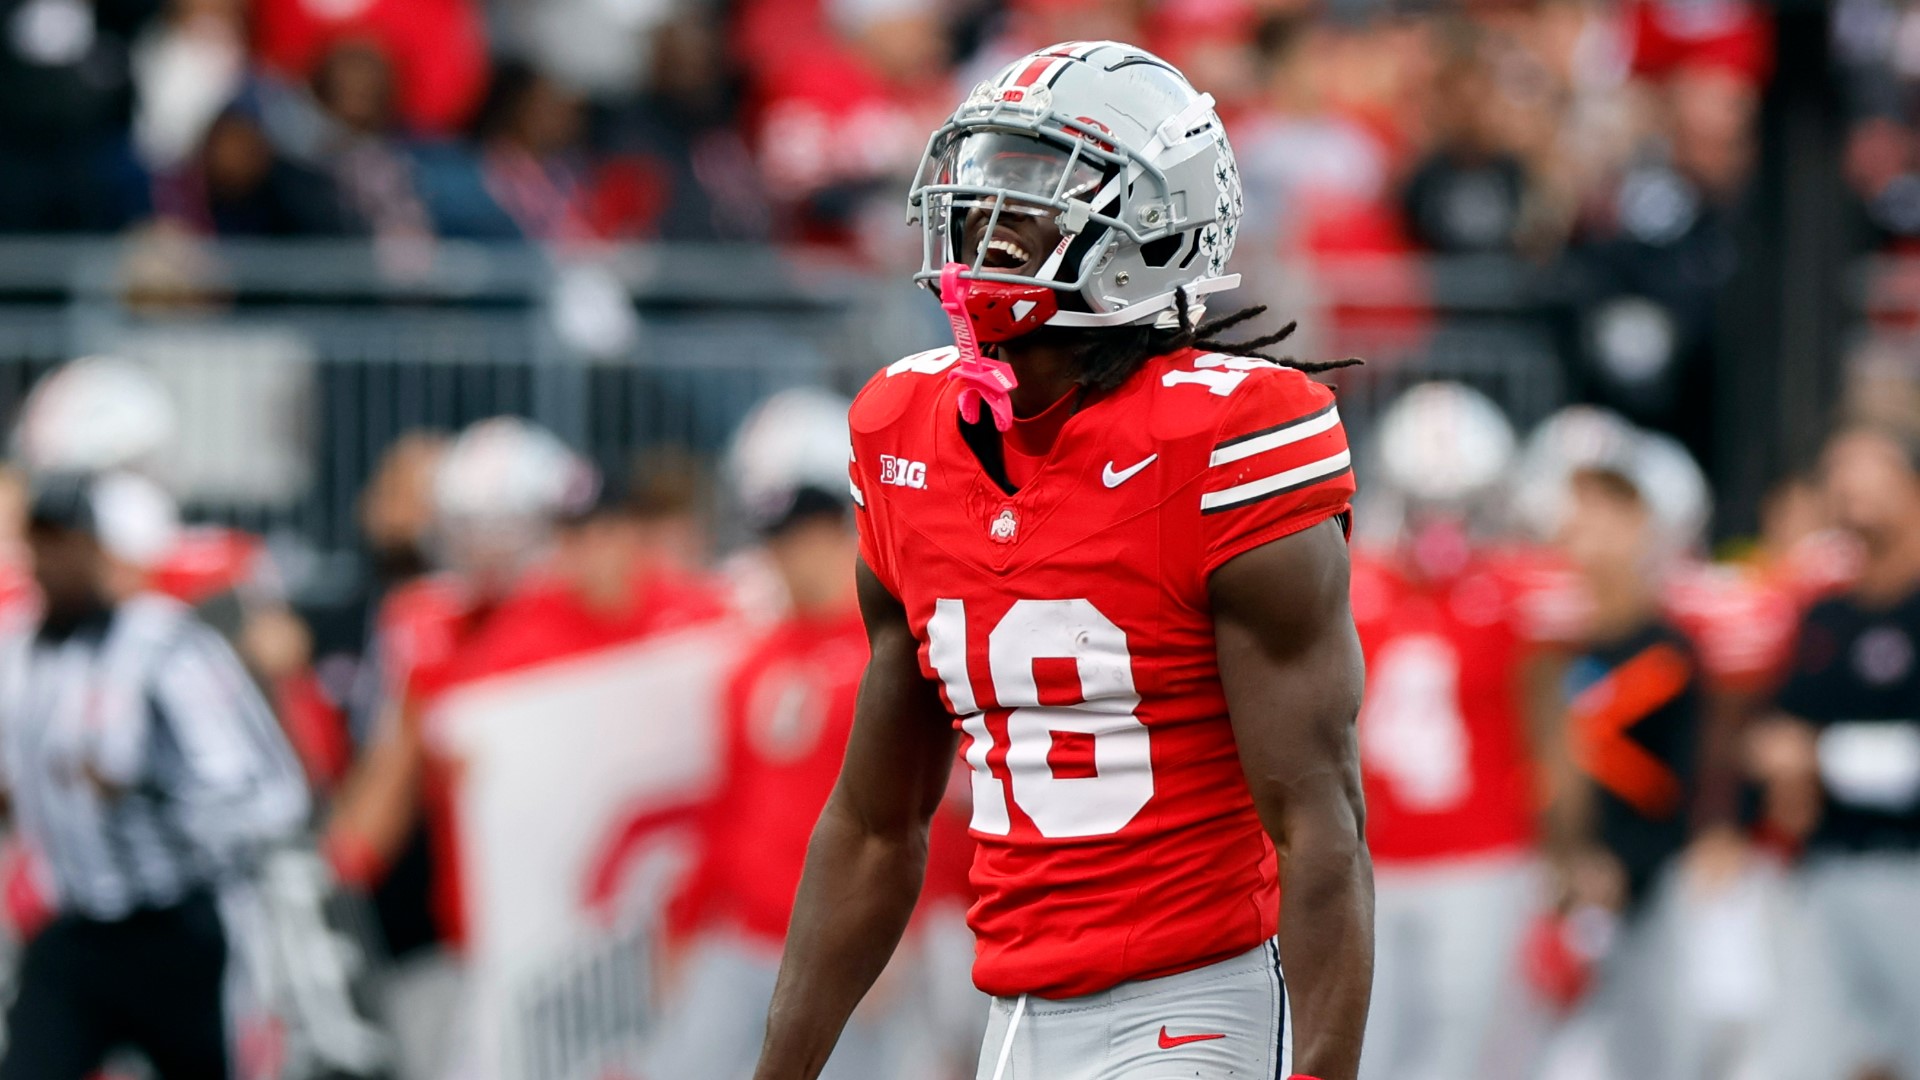 Ohio State: 9 Buckeyes out for the Cotton Bowl